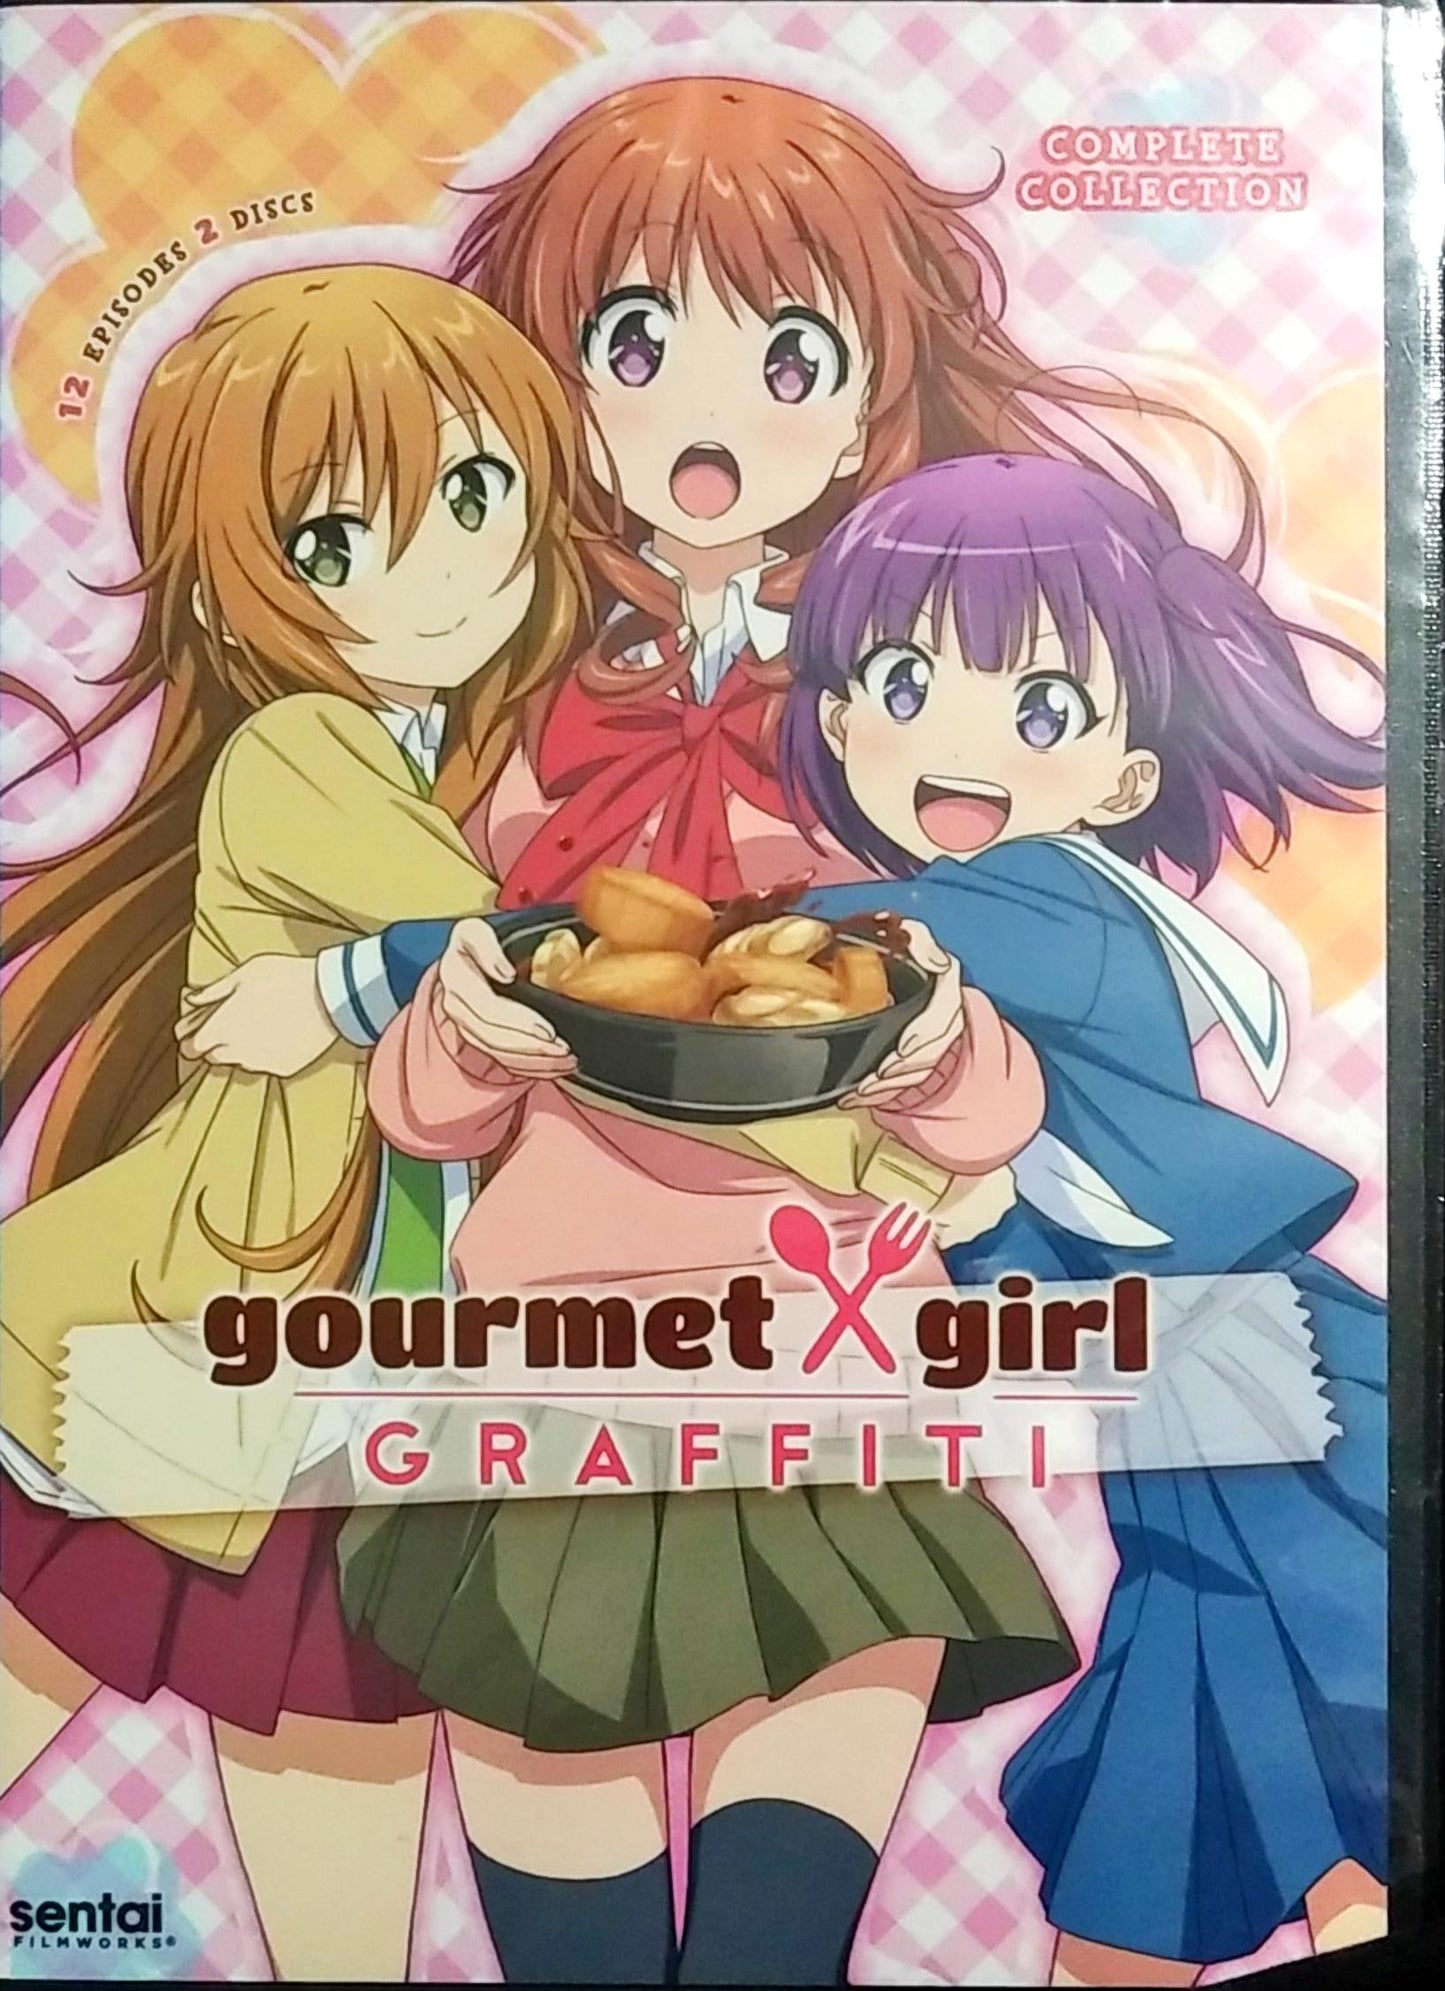 Gourmet Girl Graffiti DVD Complete Collection Sealed